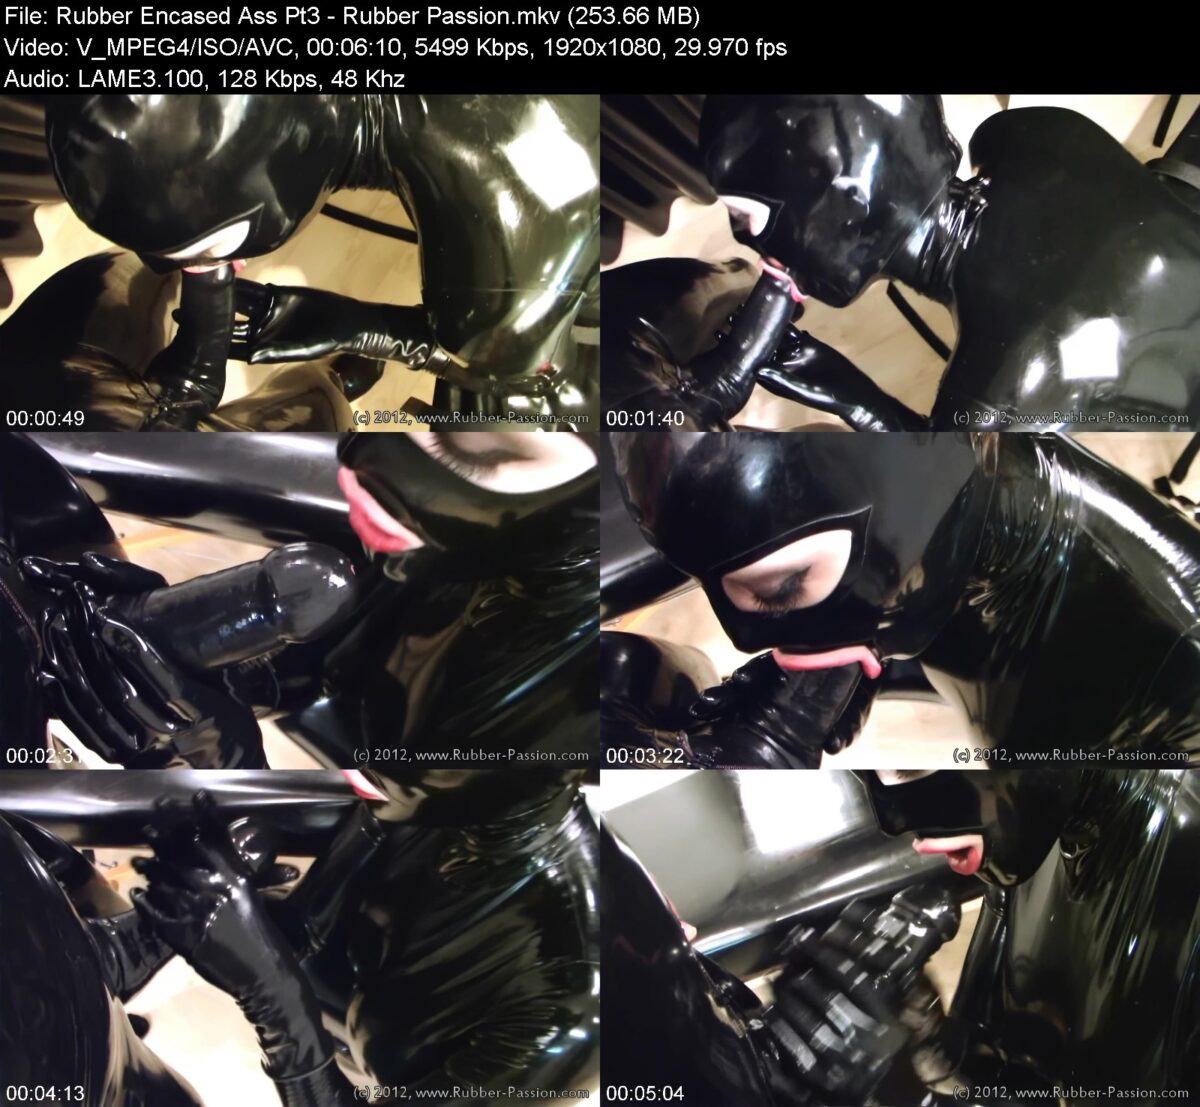 Actress: Rubber Encased Ass Pt3. Title and Studio: Rubber Passion